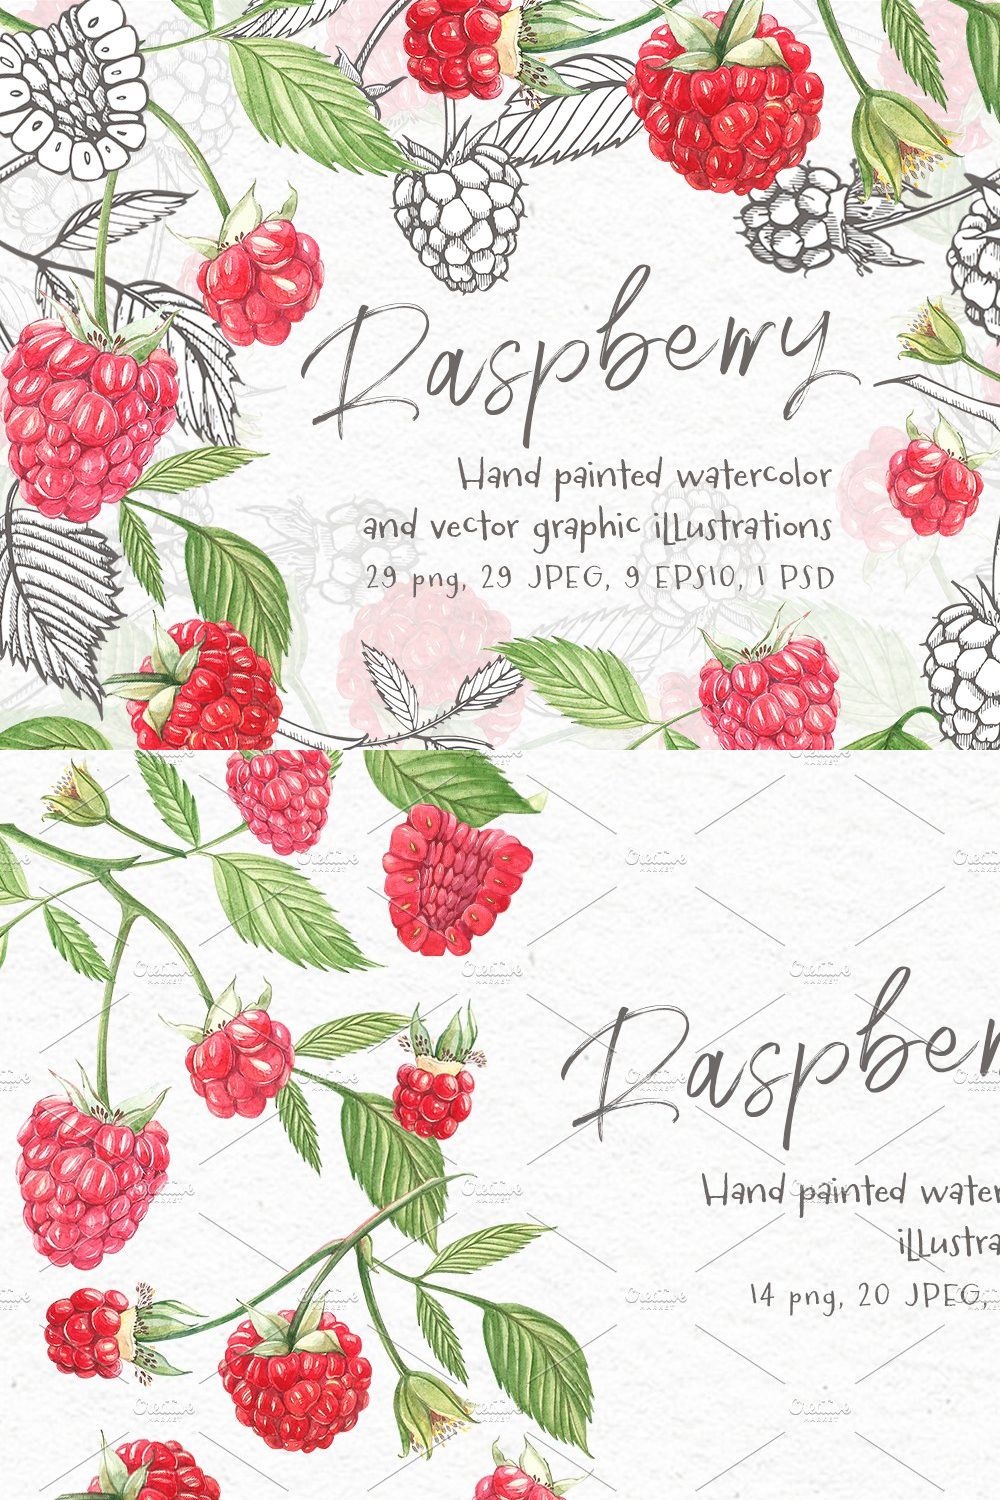 Raspberry Graphic&Watercolor clipart pinterest preview image.